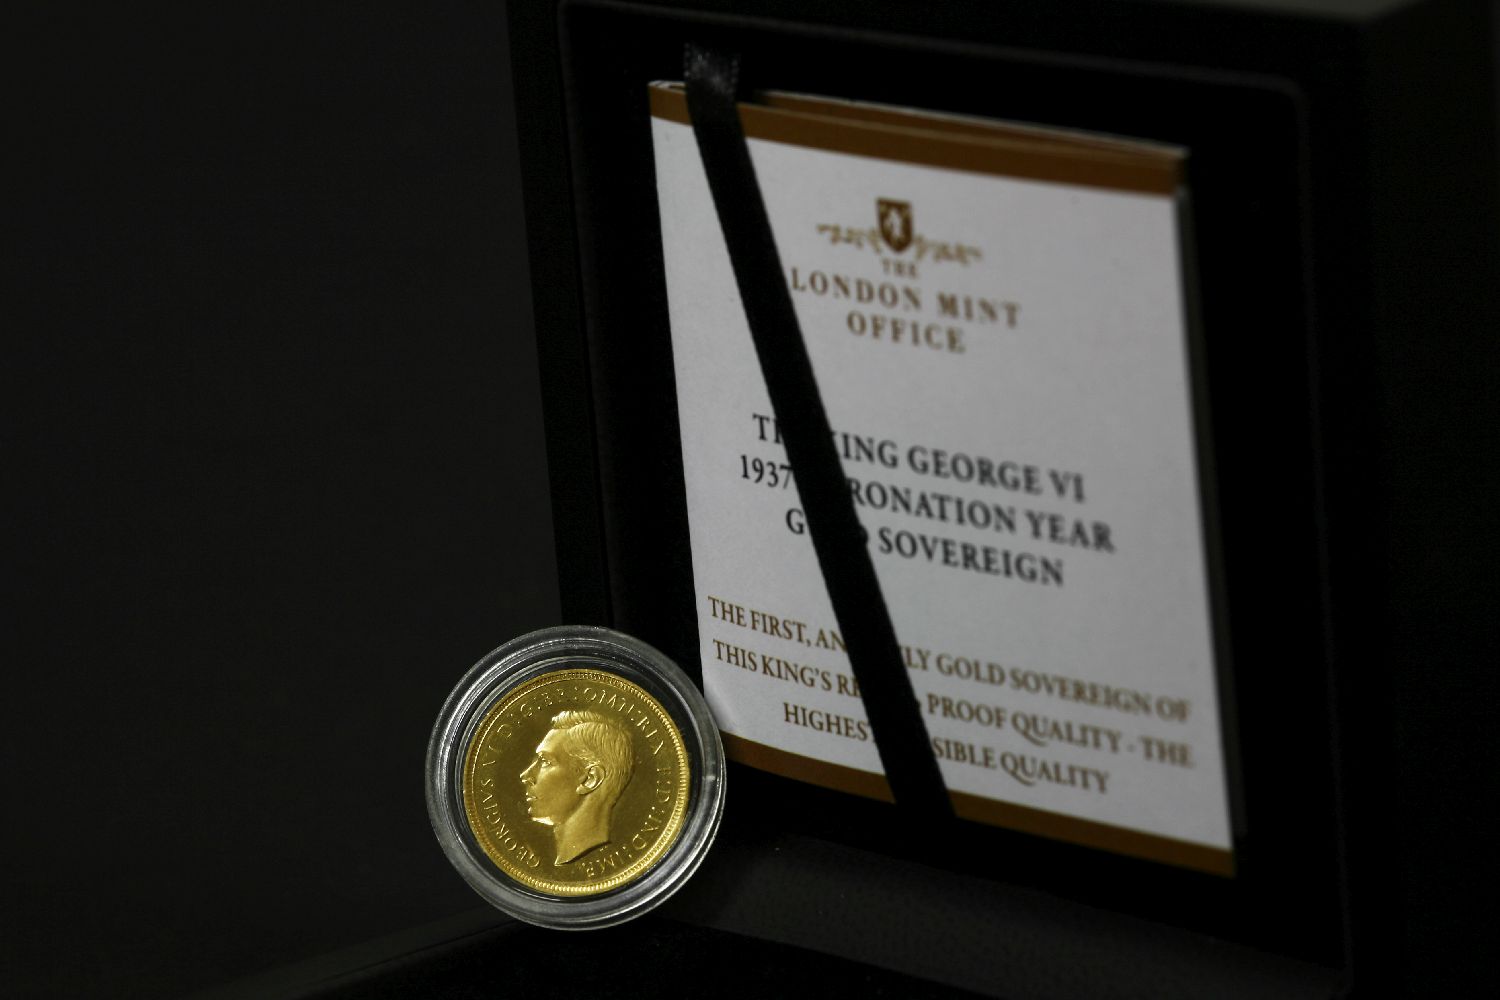 Great Britain, George VI (1936 - 1952), Proof Sovereign, 1937, released by The London Mint Office,